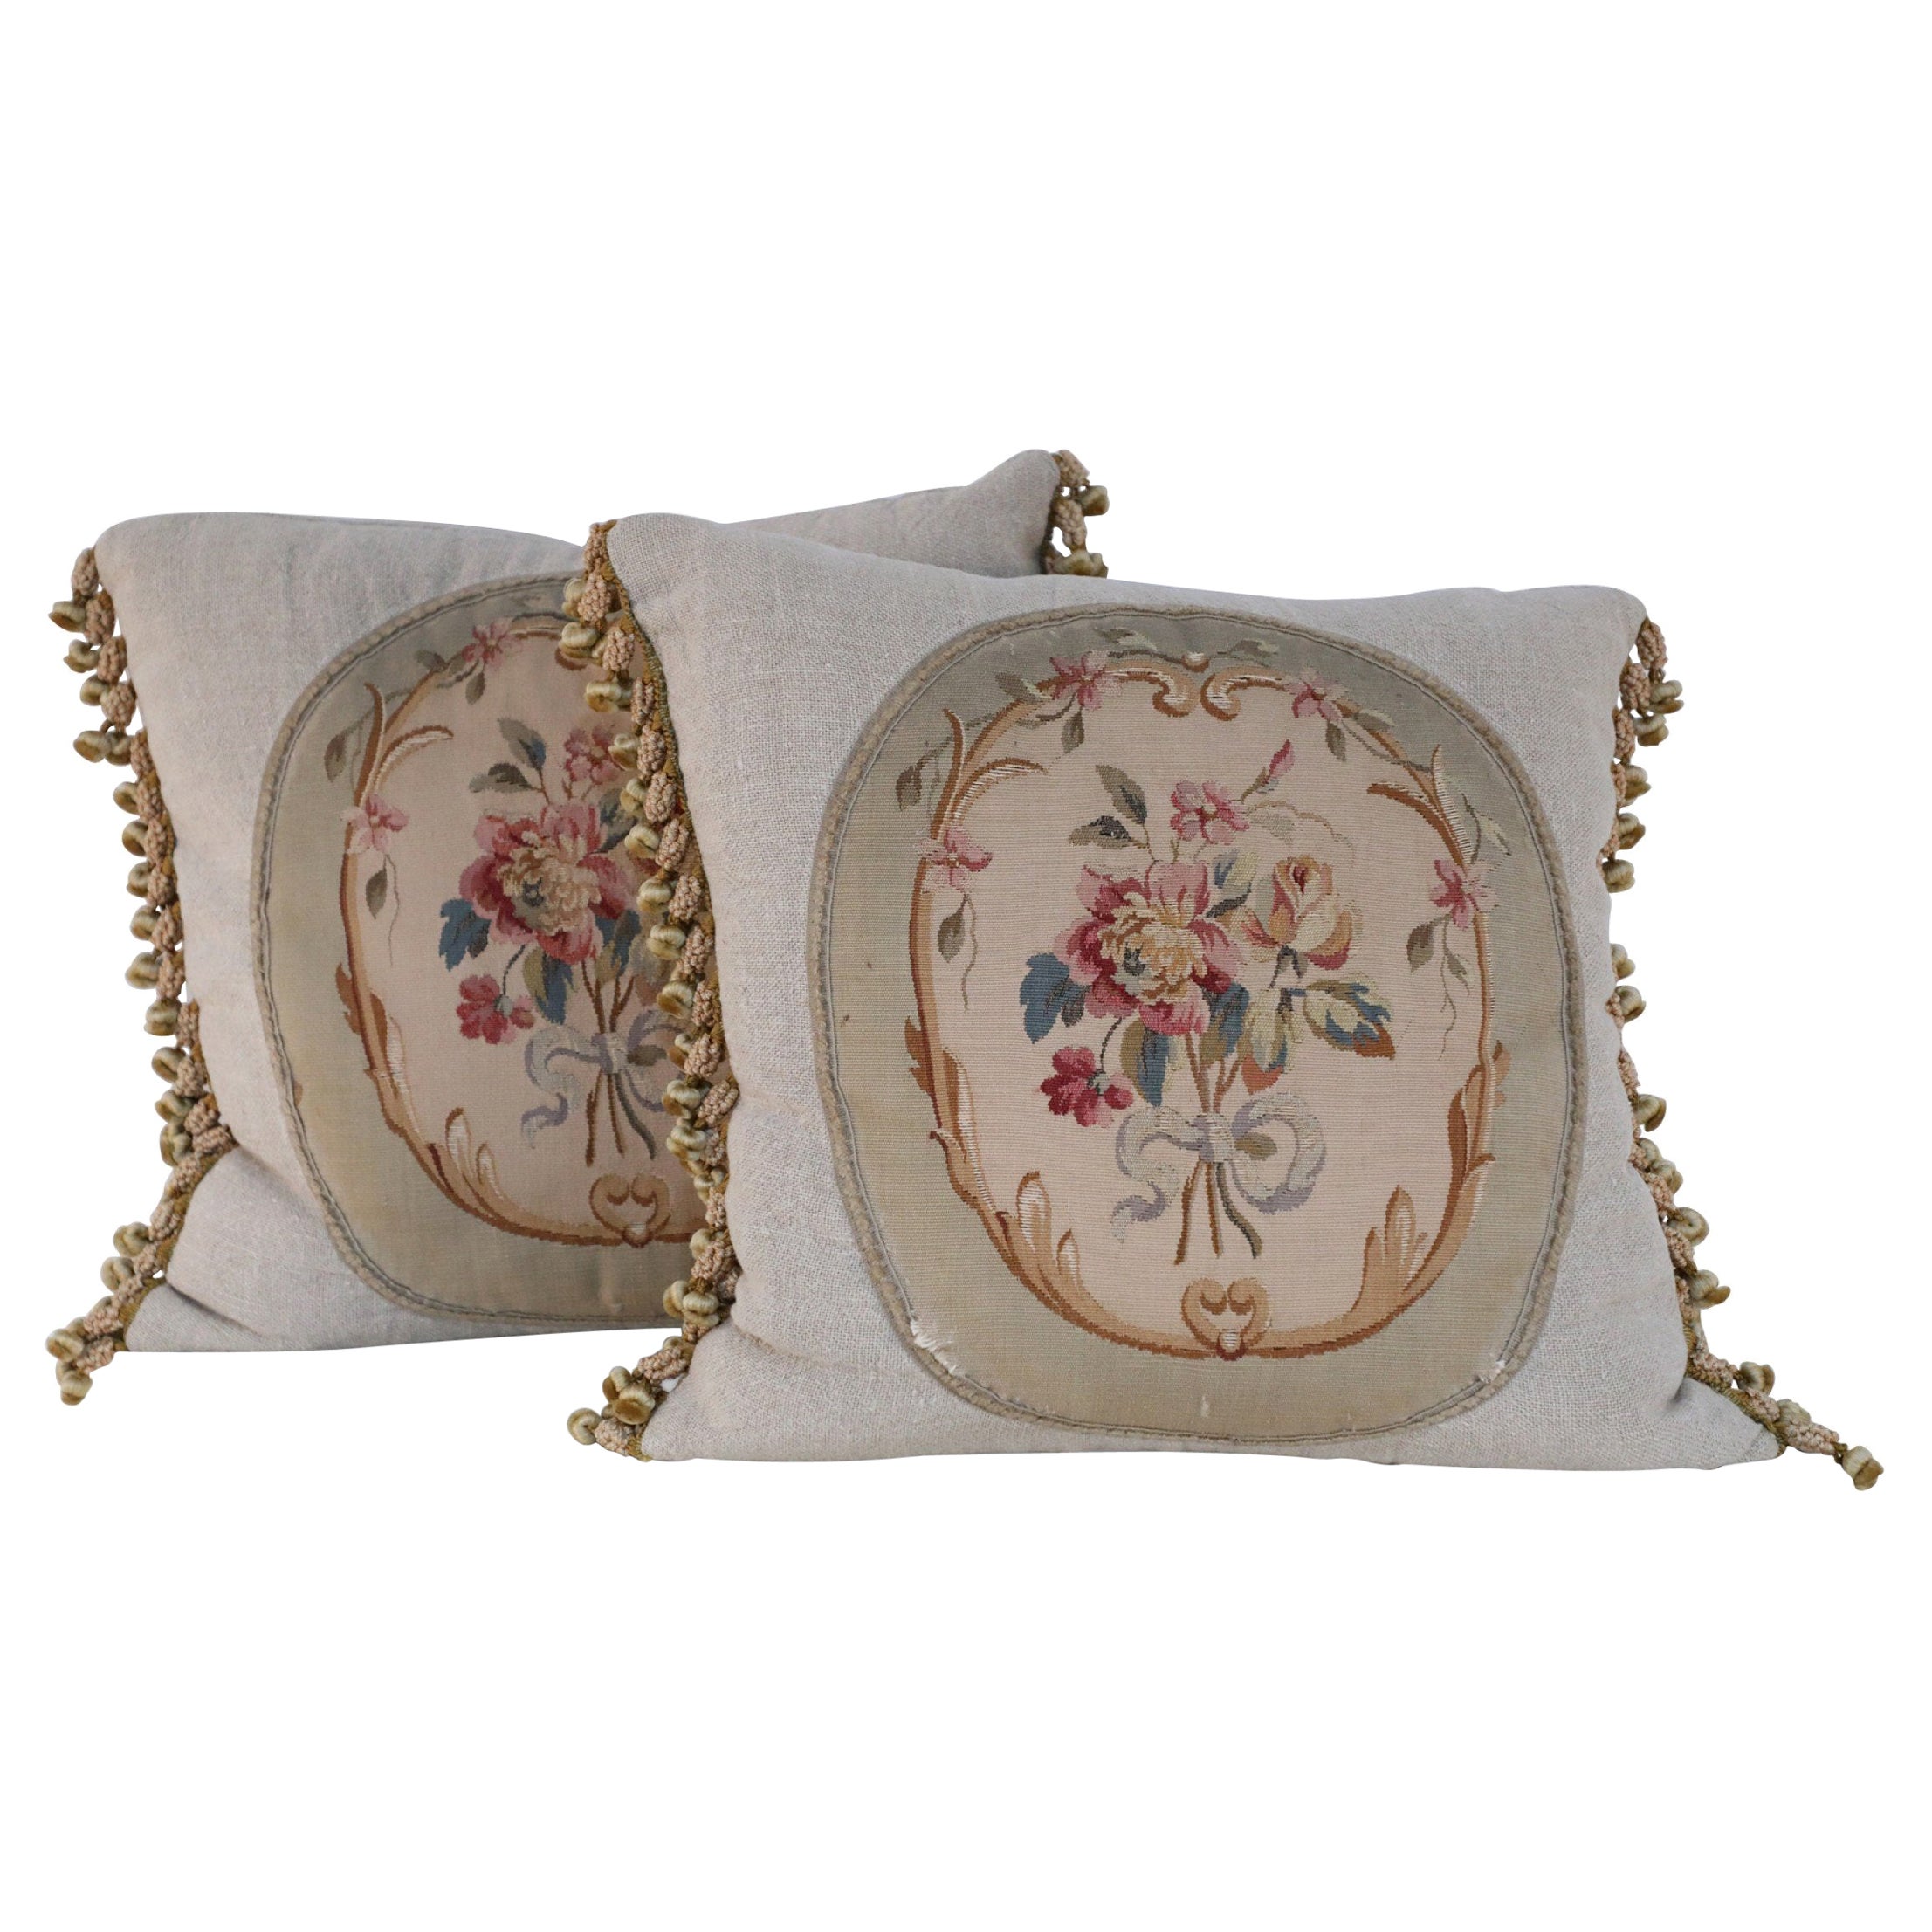 Pair of French Victorian Square Linen Pillows with Aubusson Floral Center